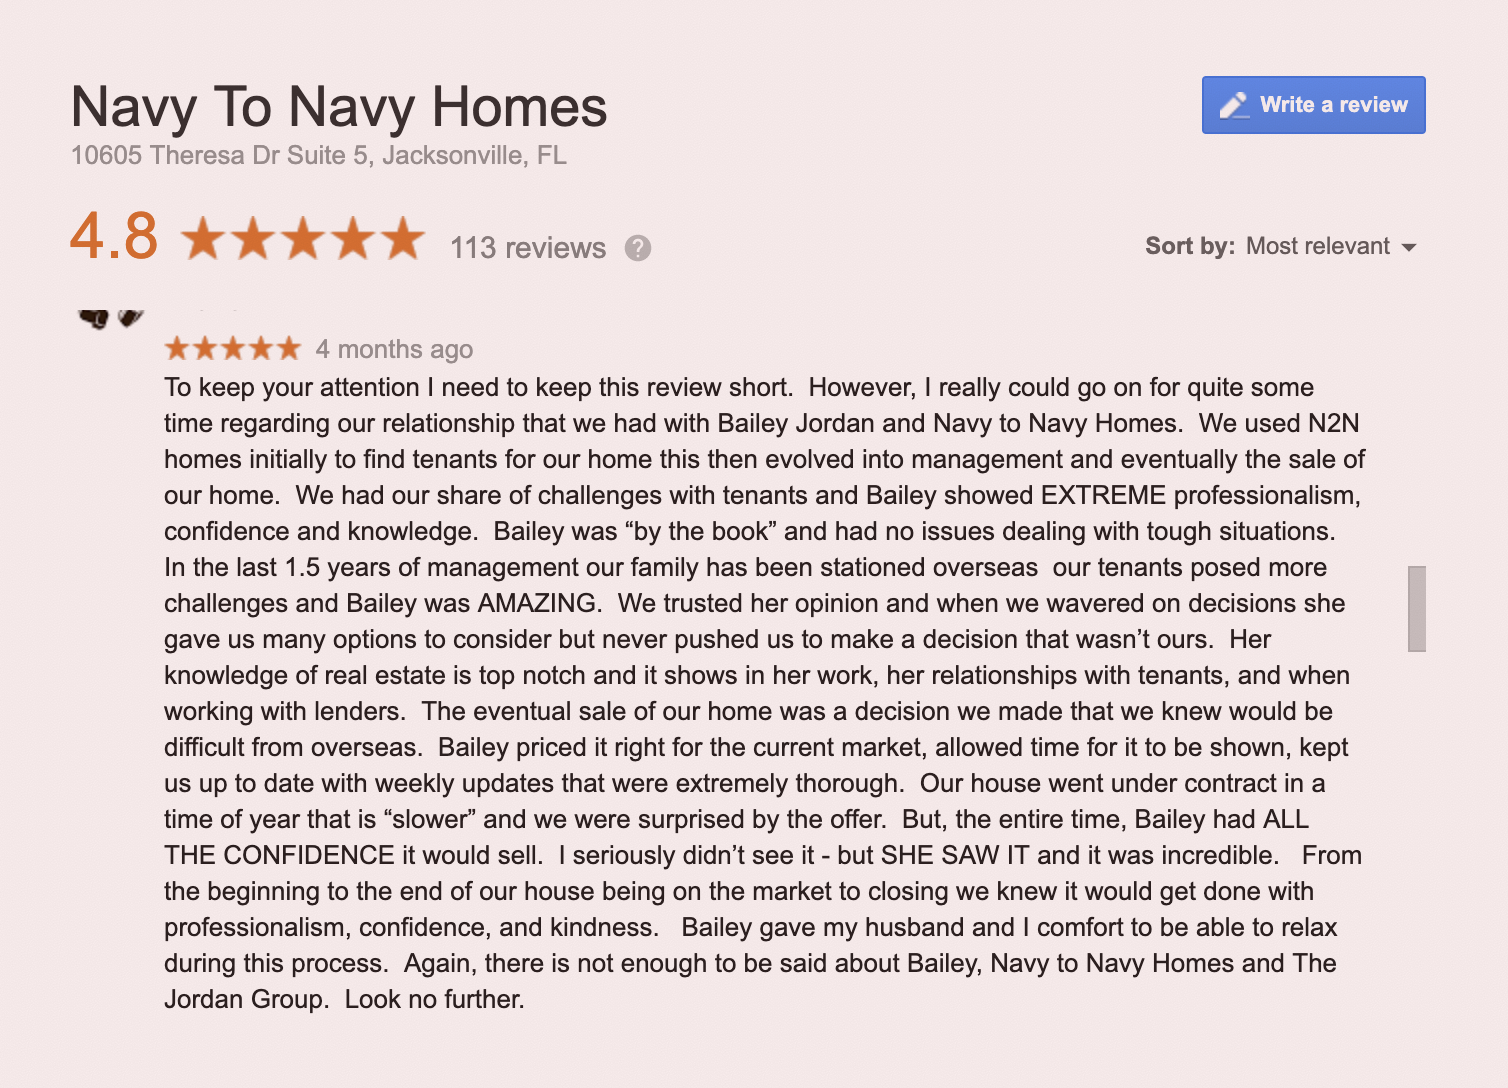 Navy to Navy Homes Property Management Services Review